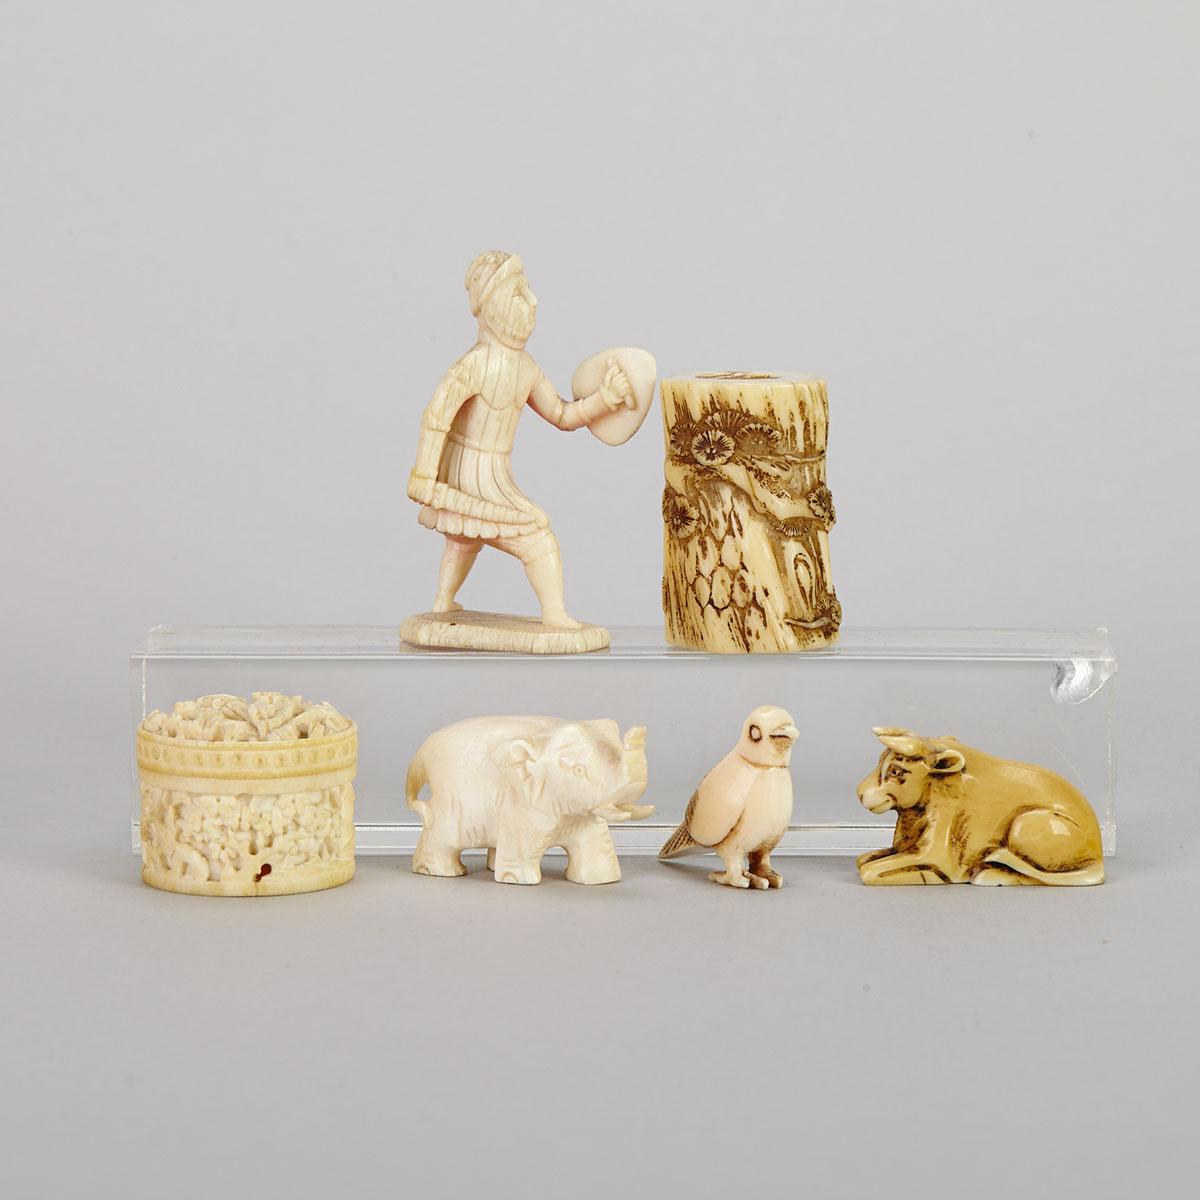 Group of Five Miniature Ivory and Bone Carvings, 19th/20th Century